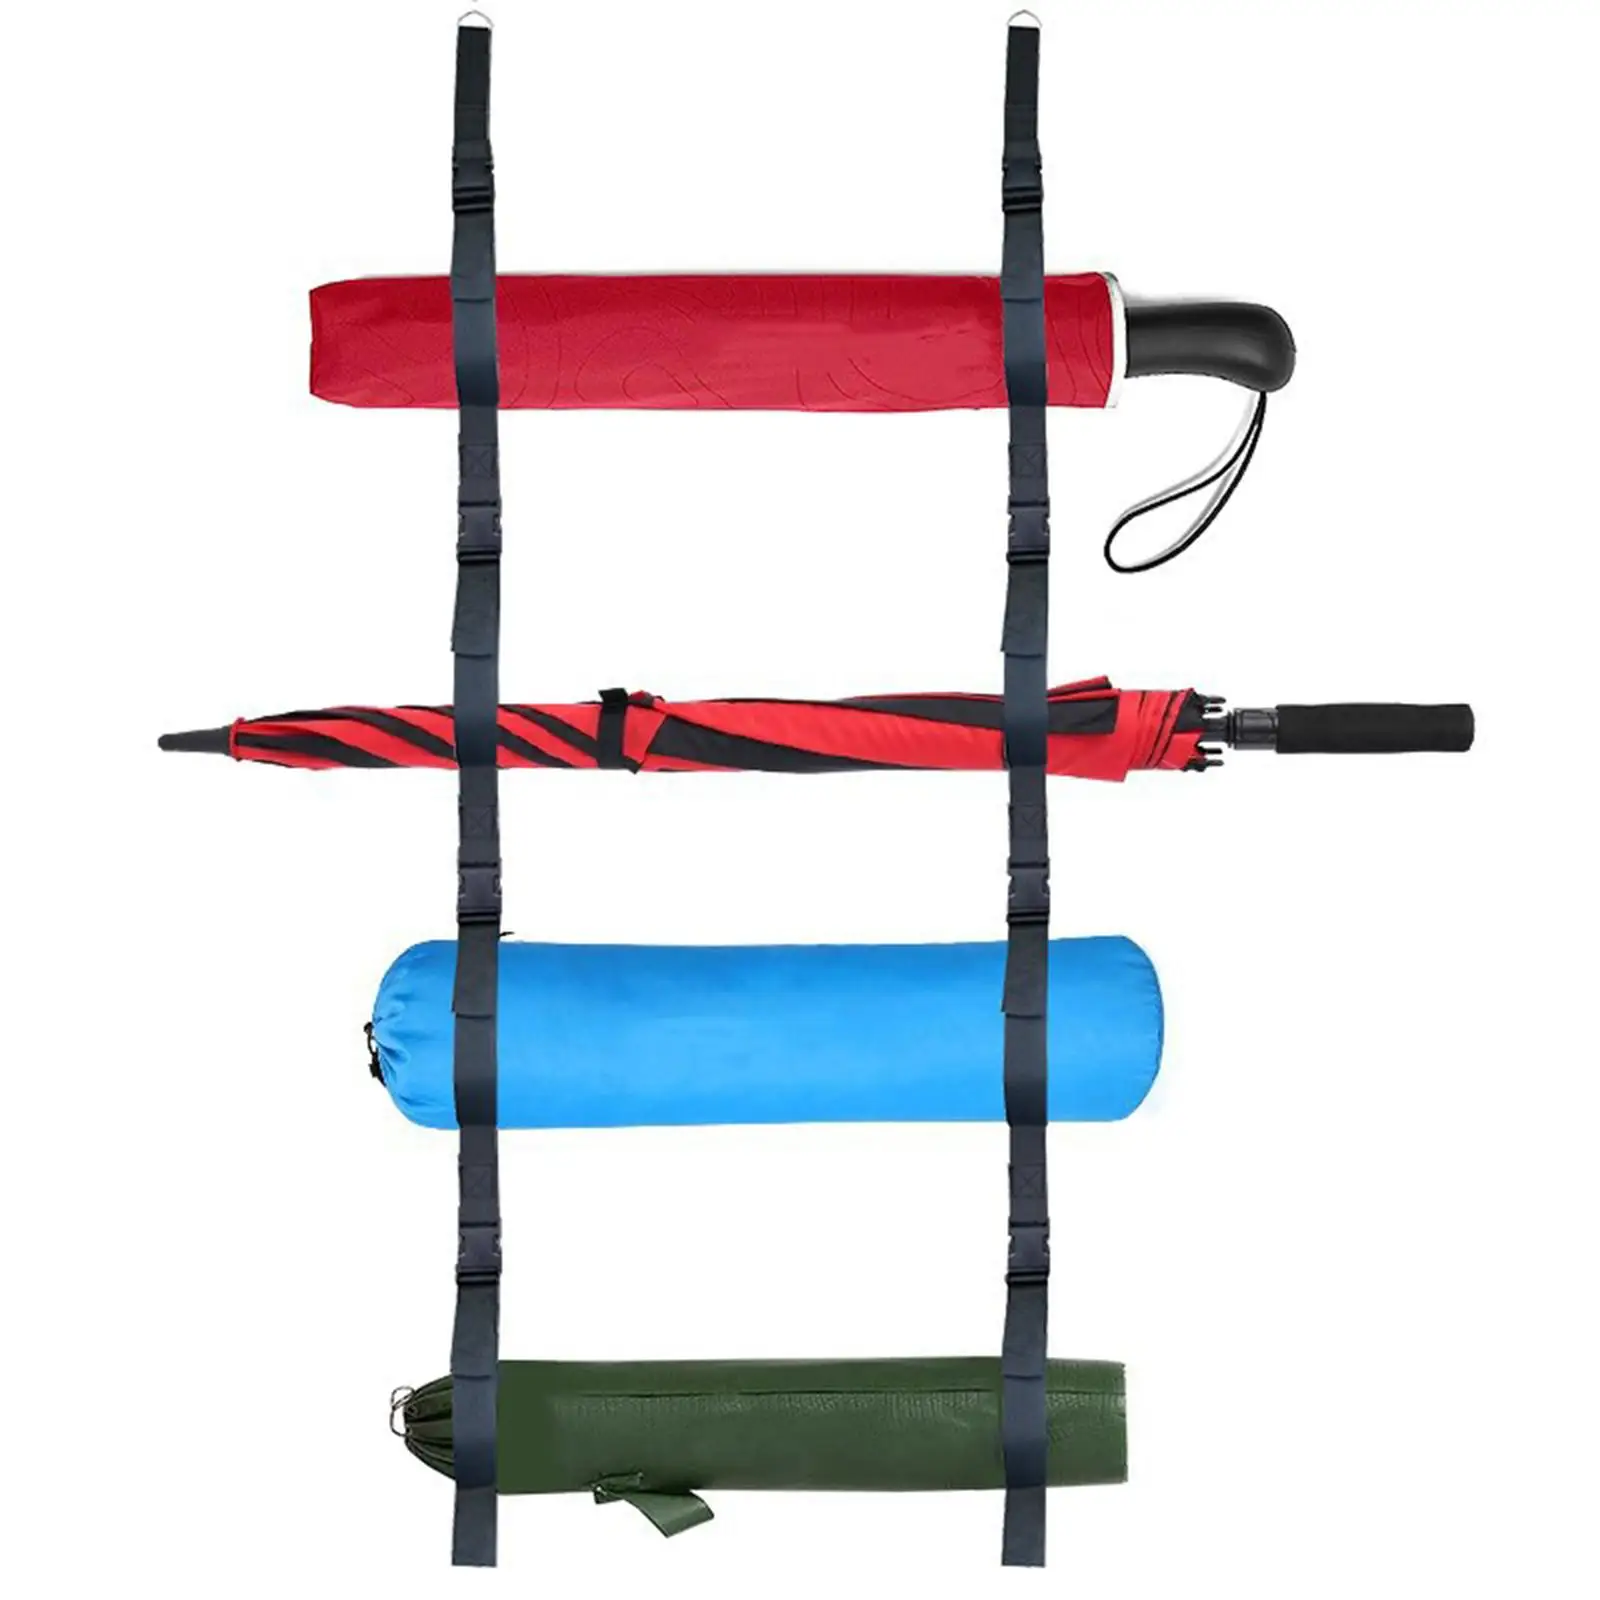 Garage Camping Chair Wall Storage Reusable Simple strong Multipurpose Wall Storage Straps Quick Release Buckles Fixing Belt